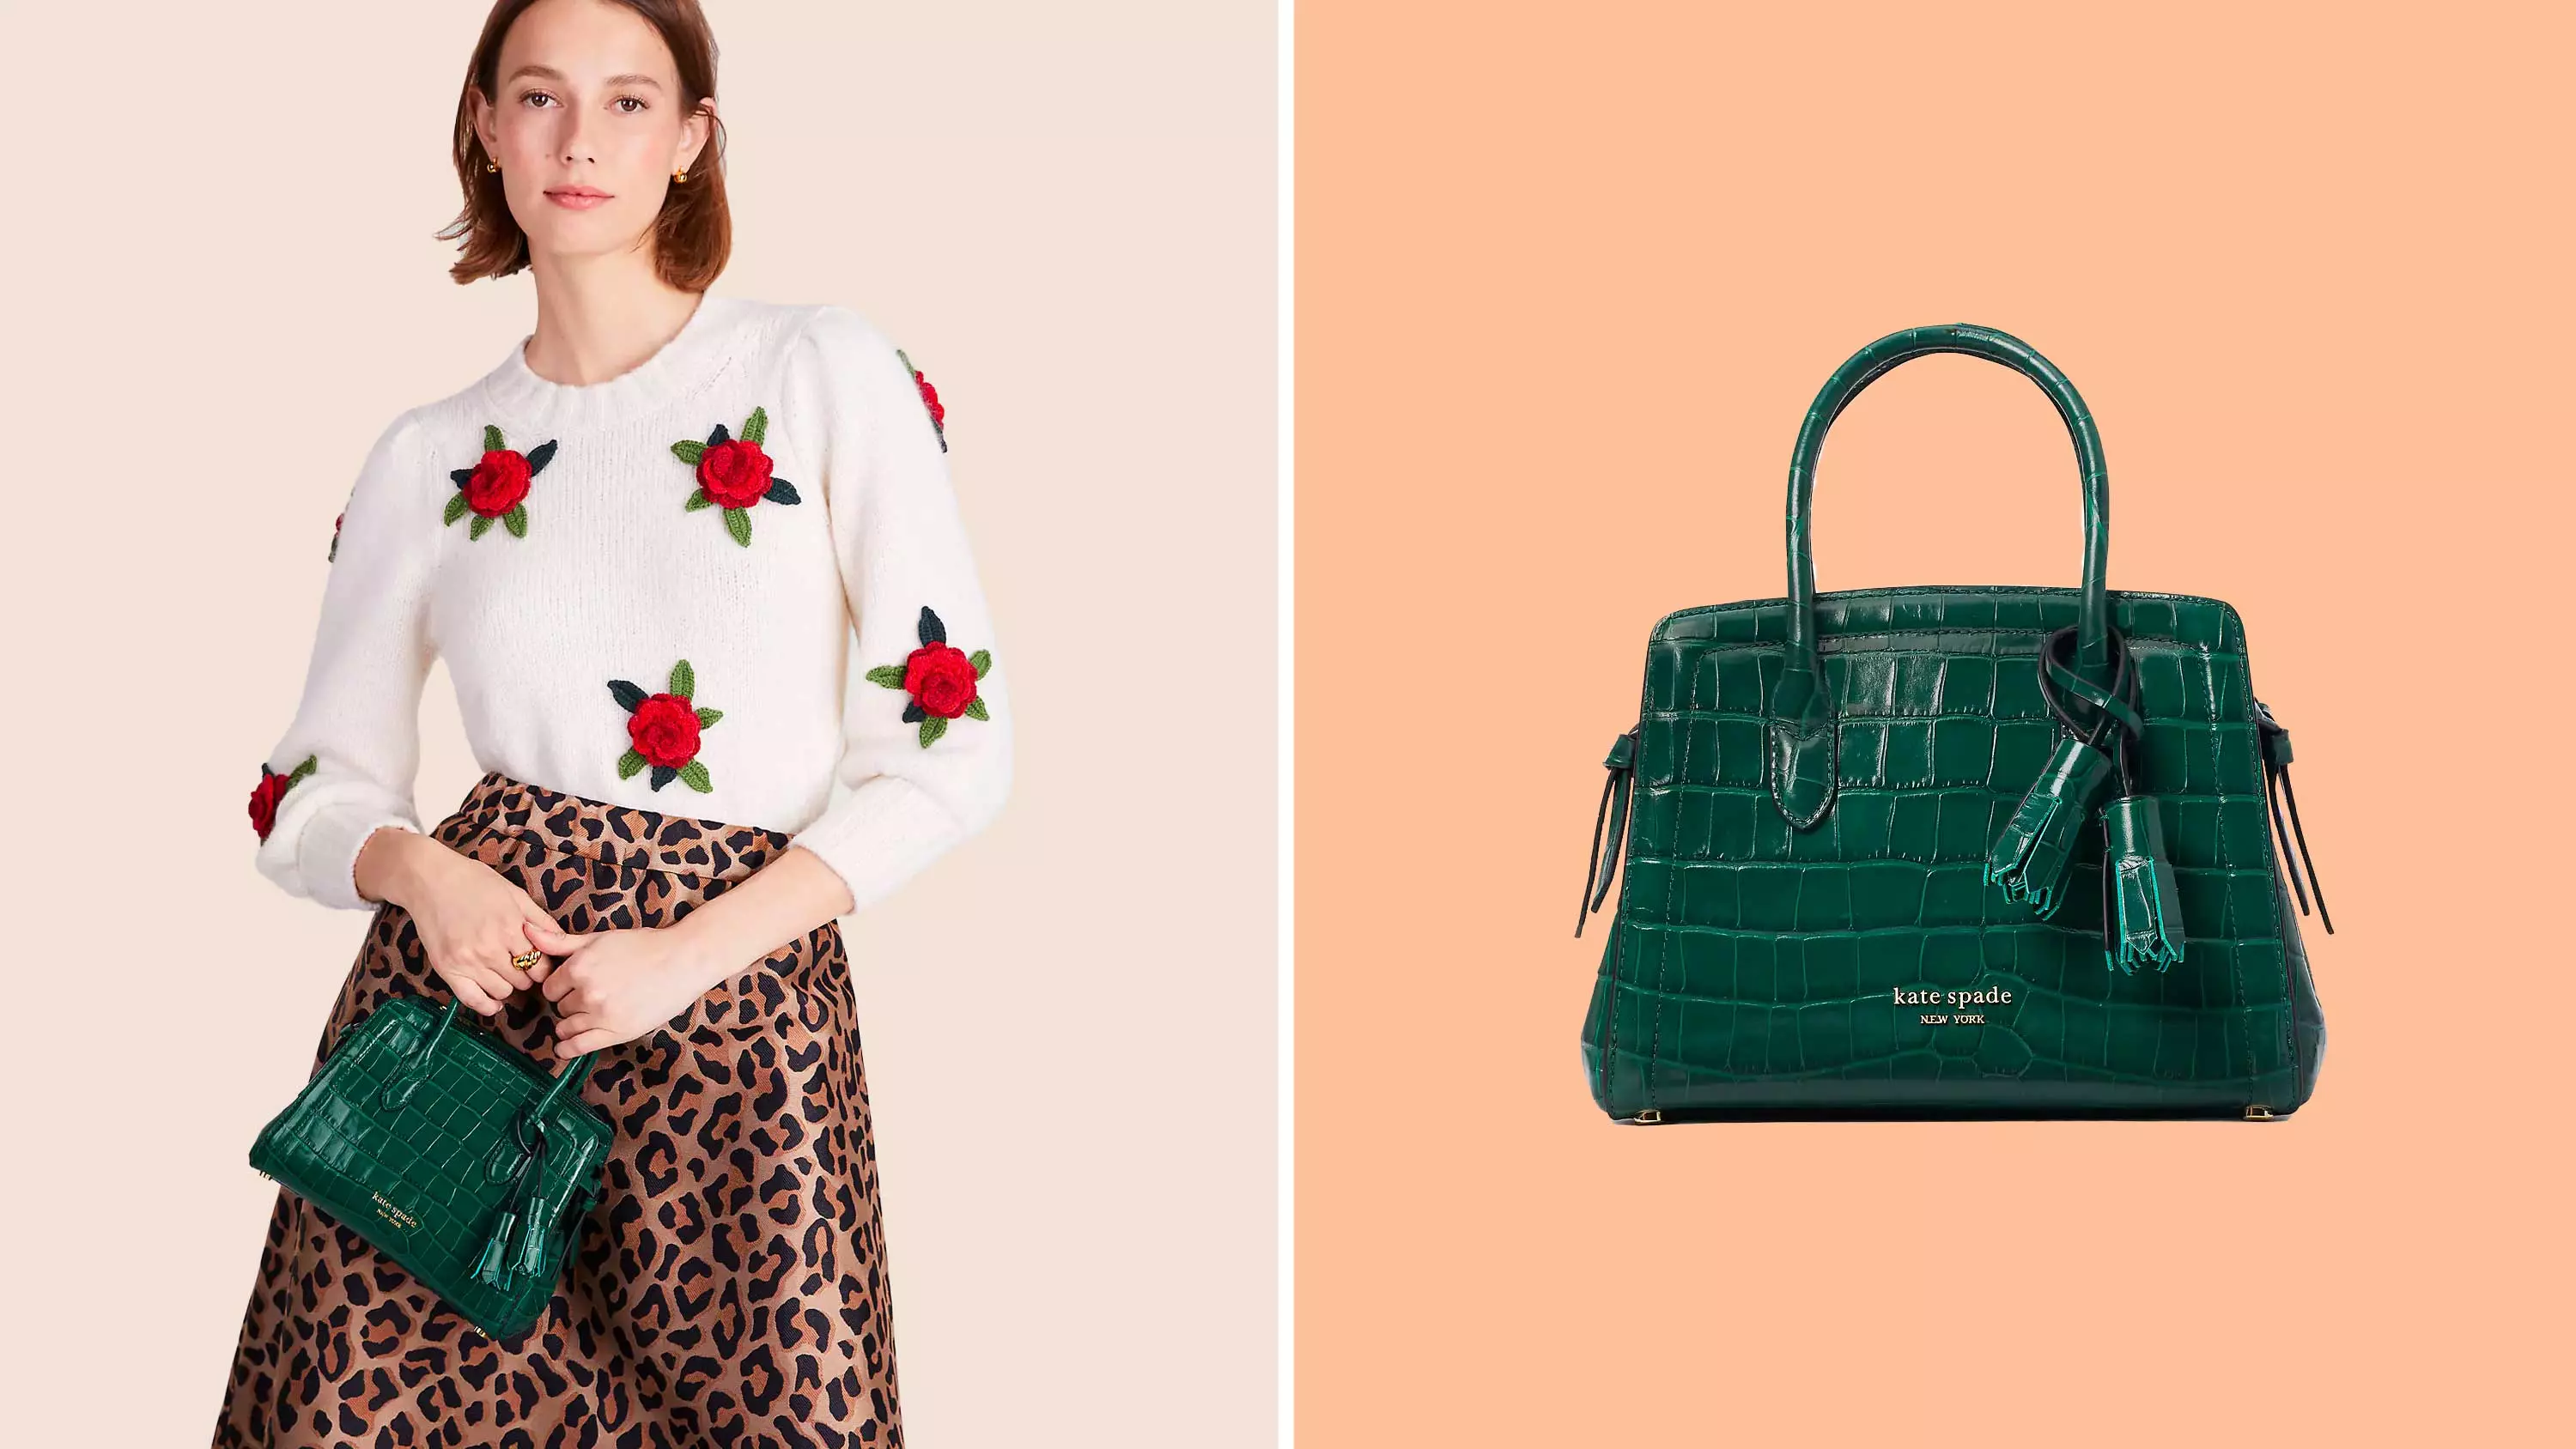 Looking for a cute purse with an edgy flair? Shop the Kate Spade Knott Croc-Embossed Mini Satchel today.